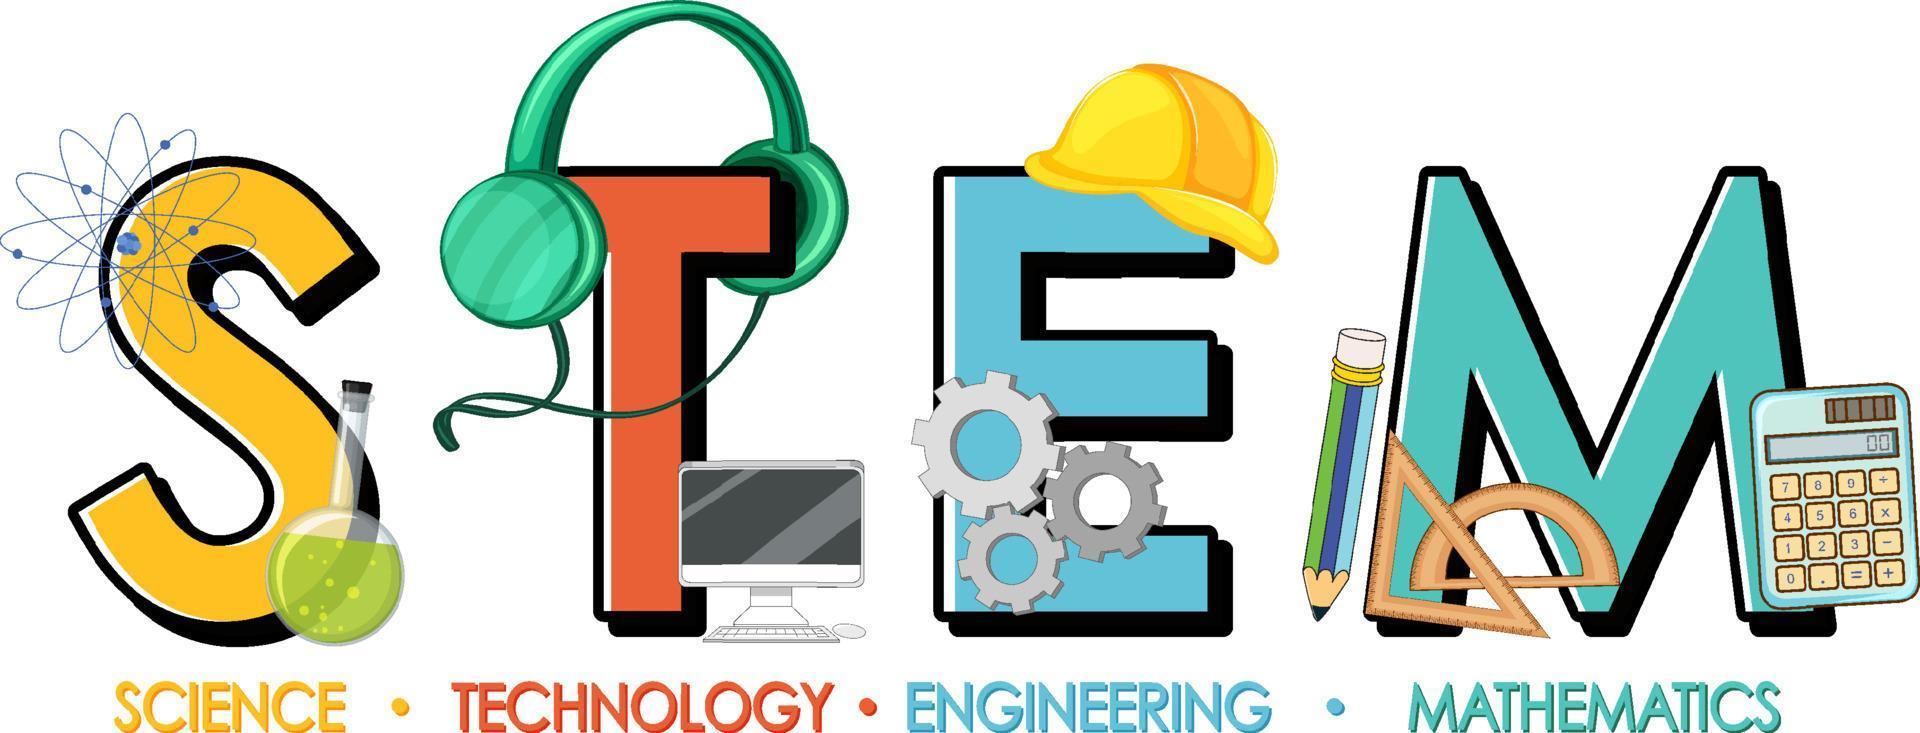 STEM logo with education and learning icon elements vector